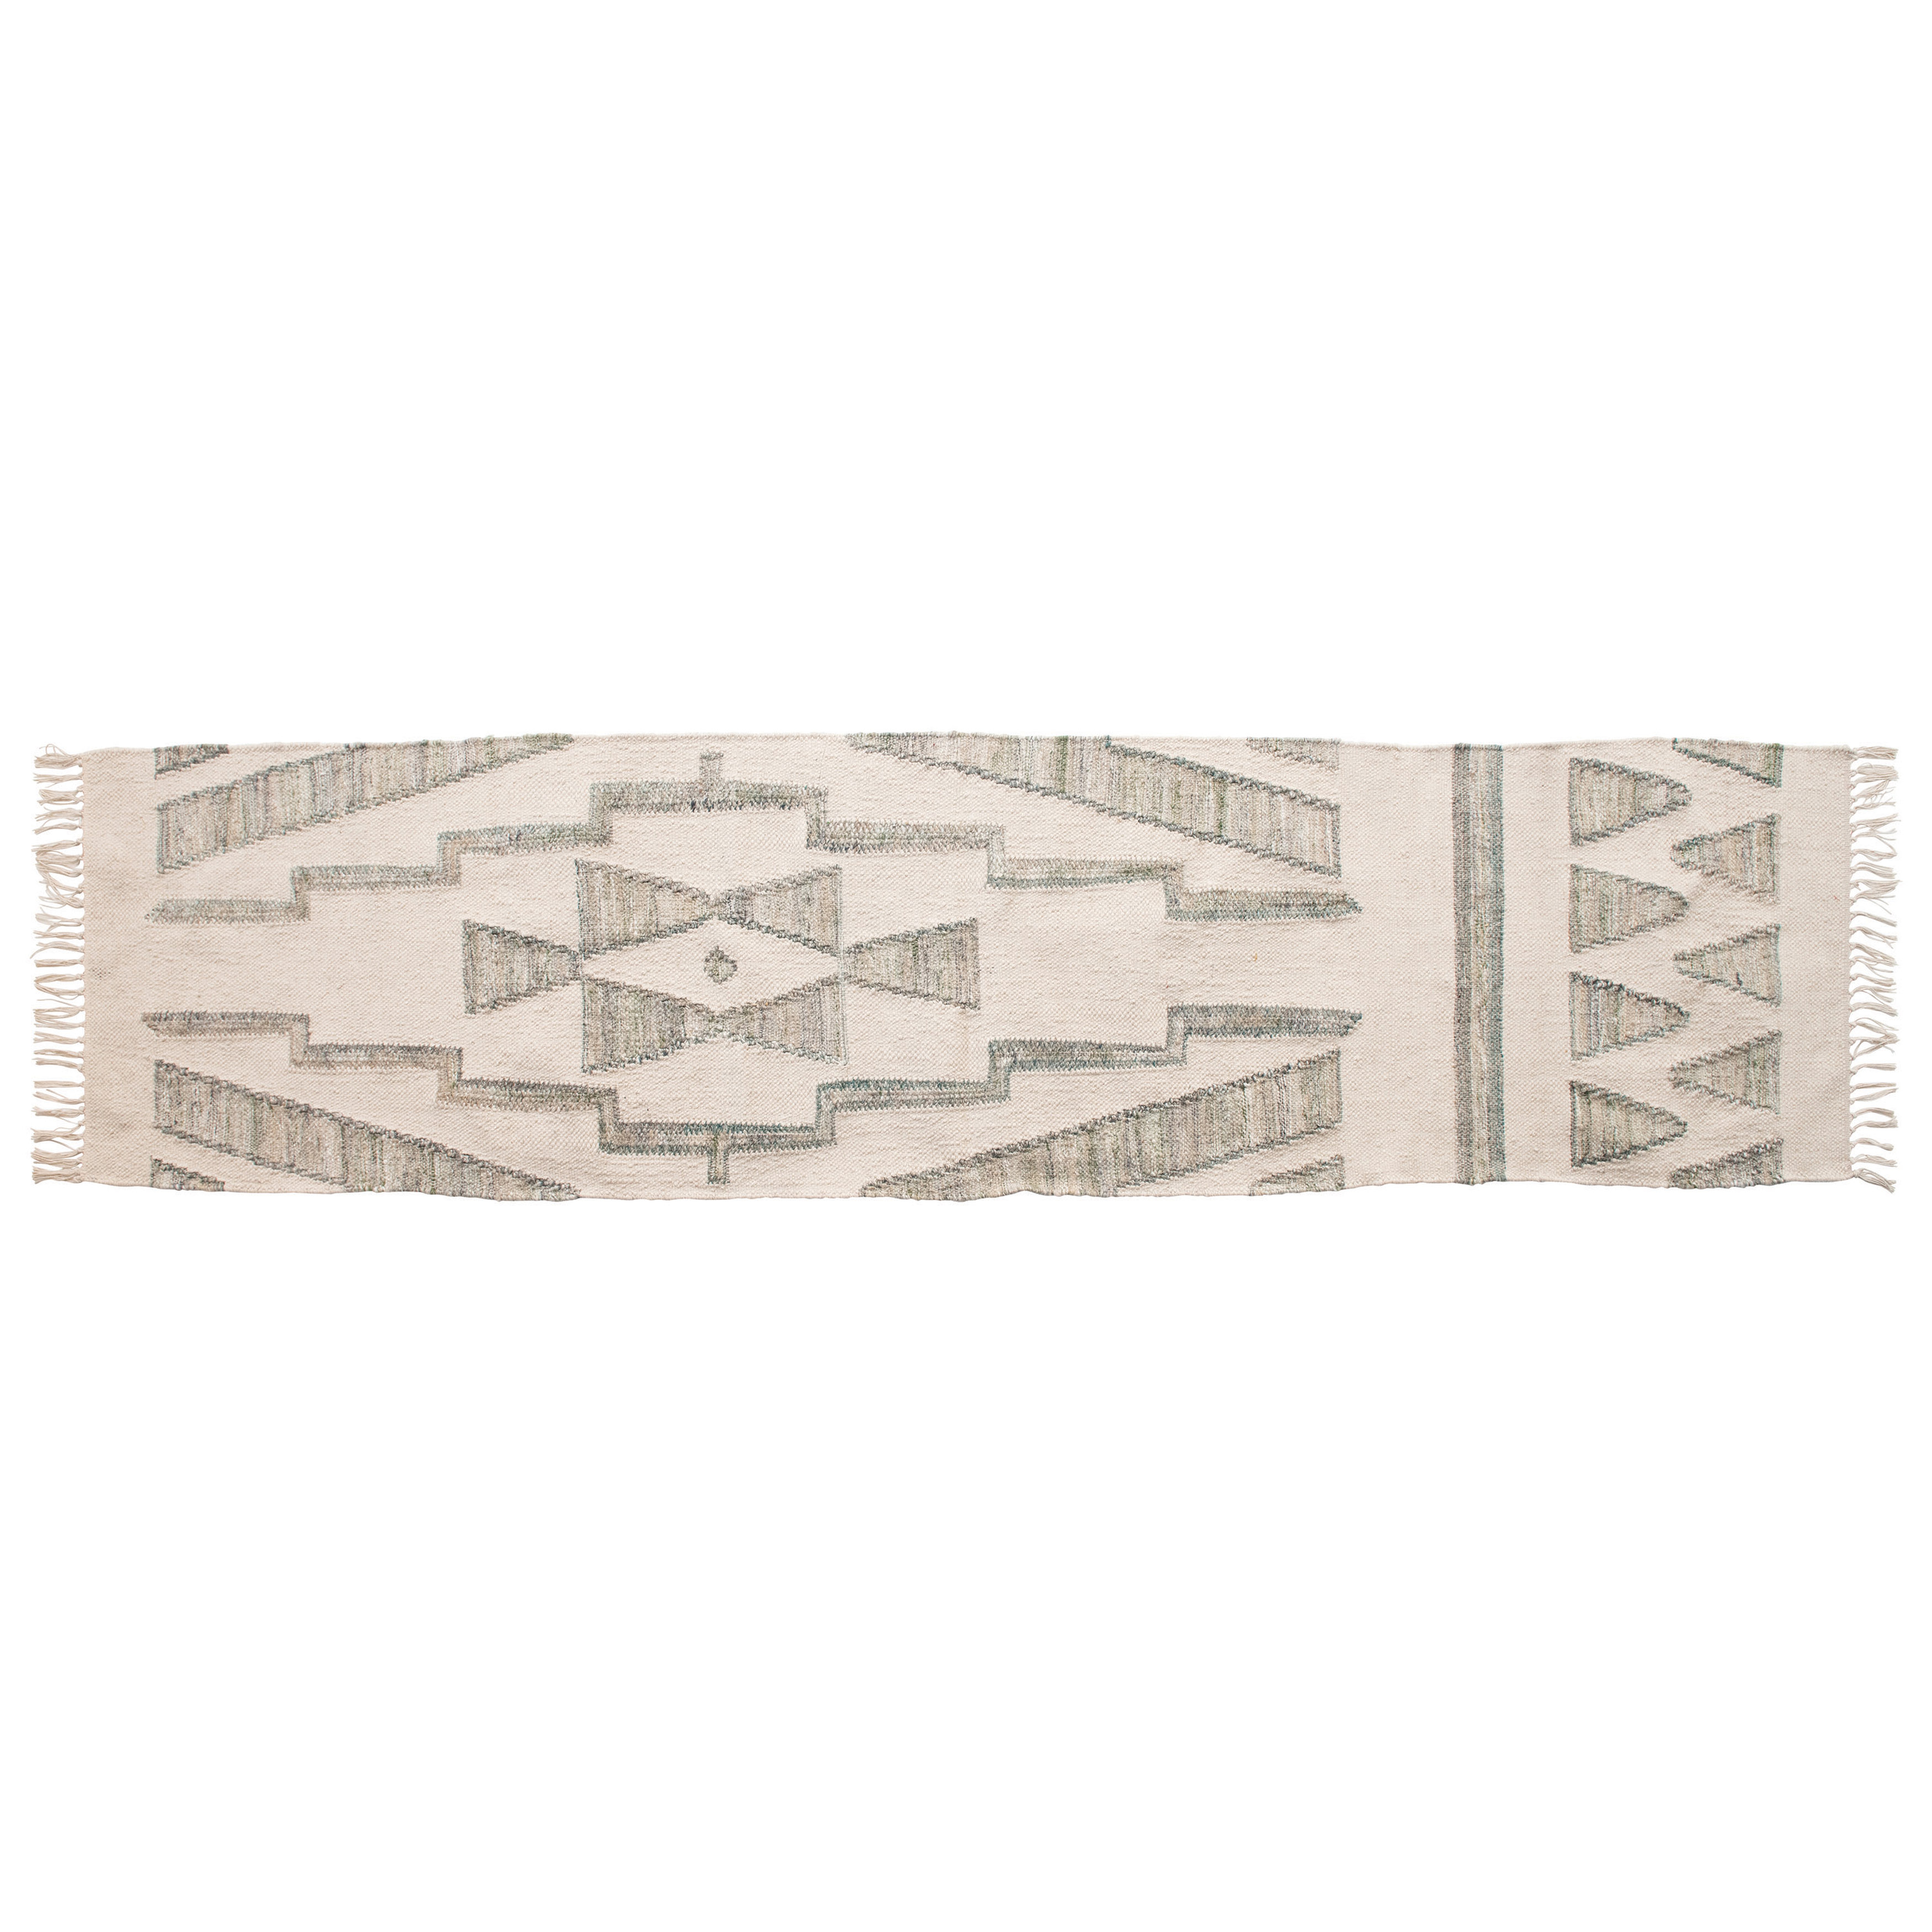 Hand-Woven Cotton & Wool Kilim Floor Runner, Variegated Green & Cream Color - Nomad Home